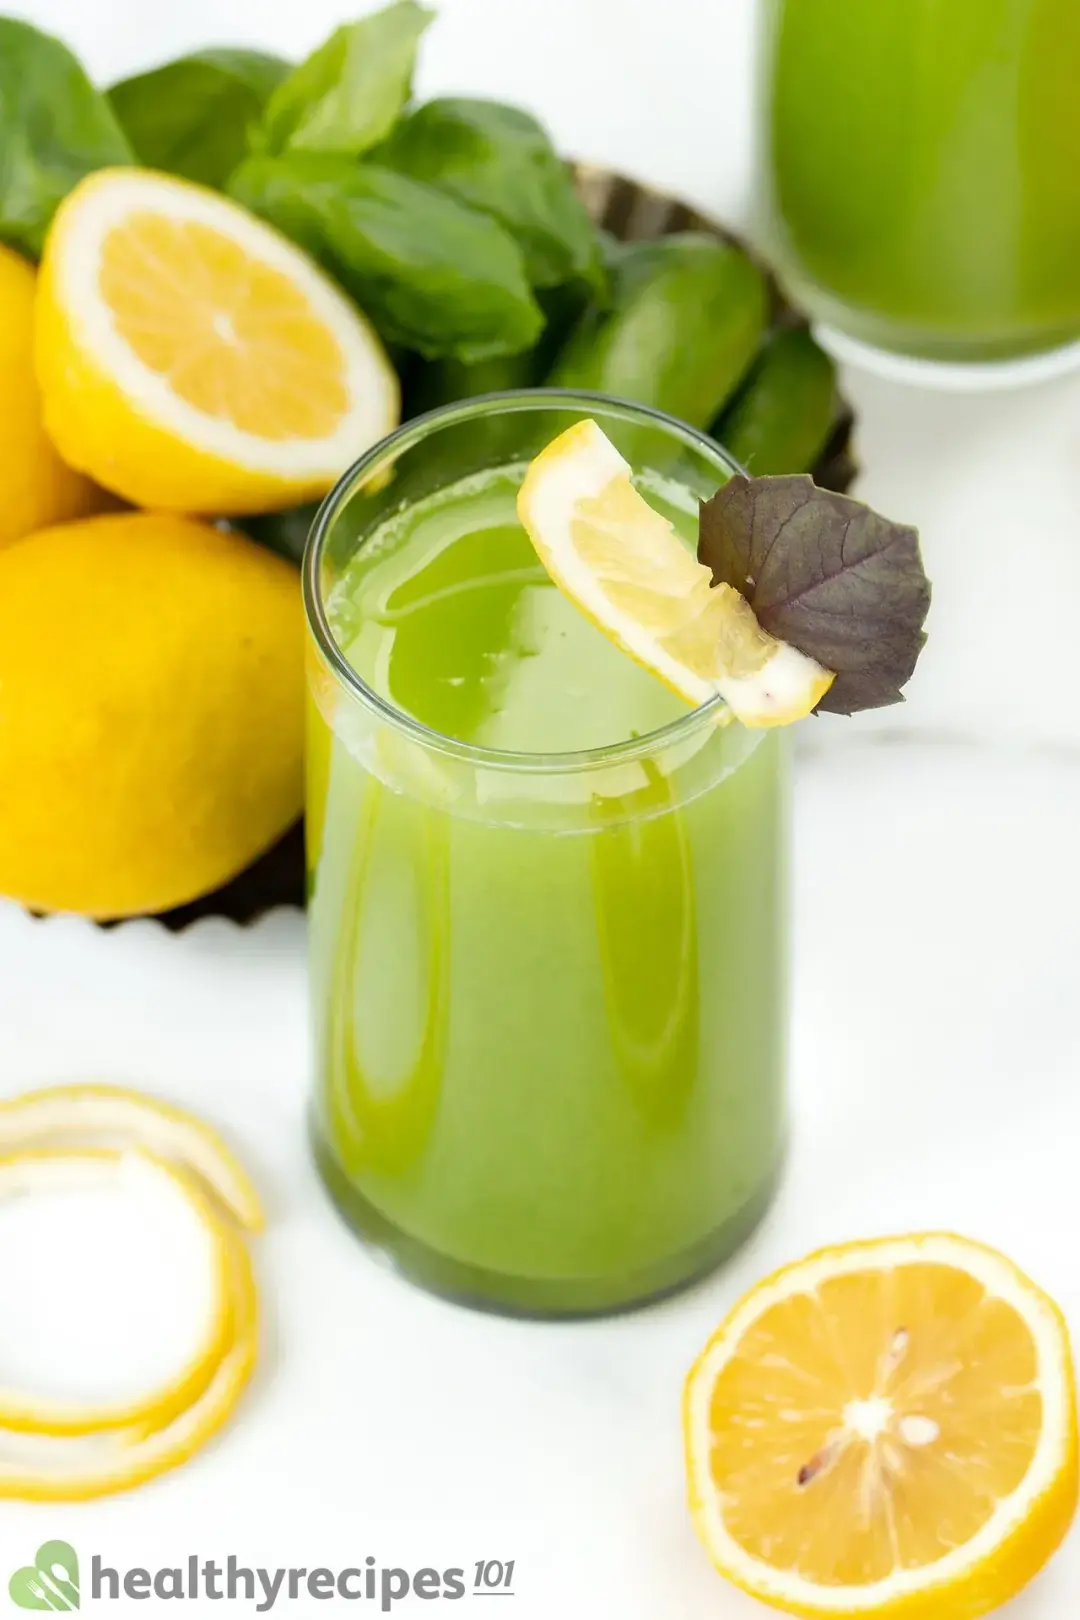 A tall glass of cucumber drink garnished with lemon wheels, whole lemons, and lots of mints